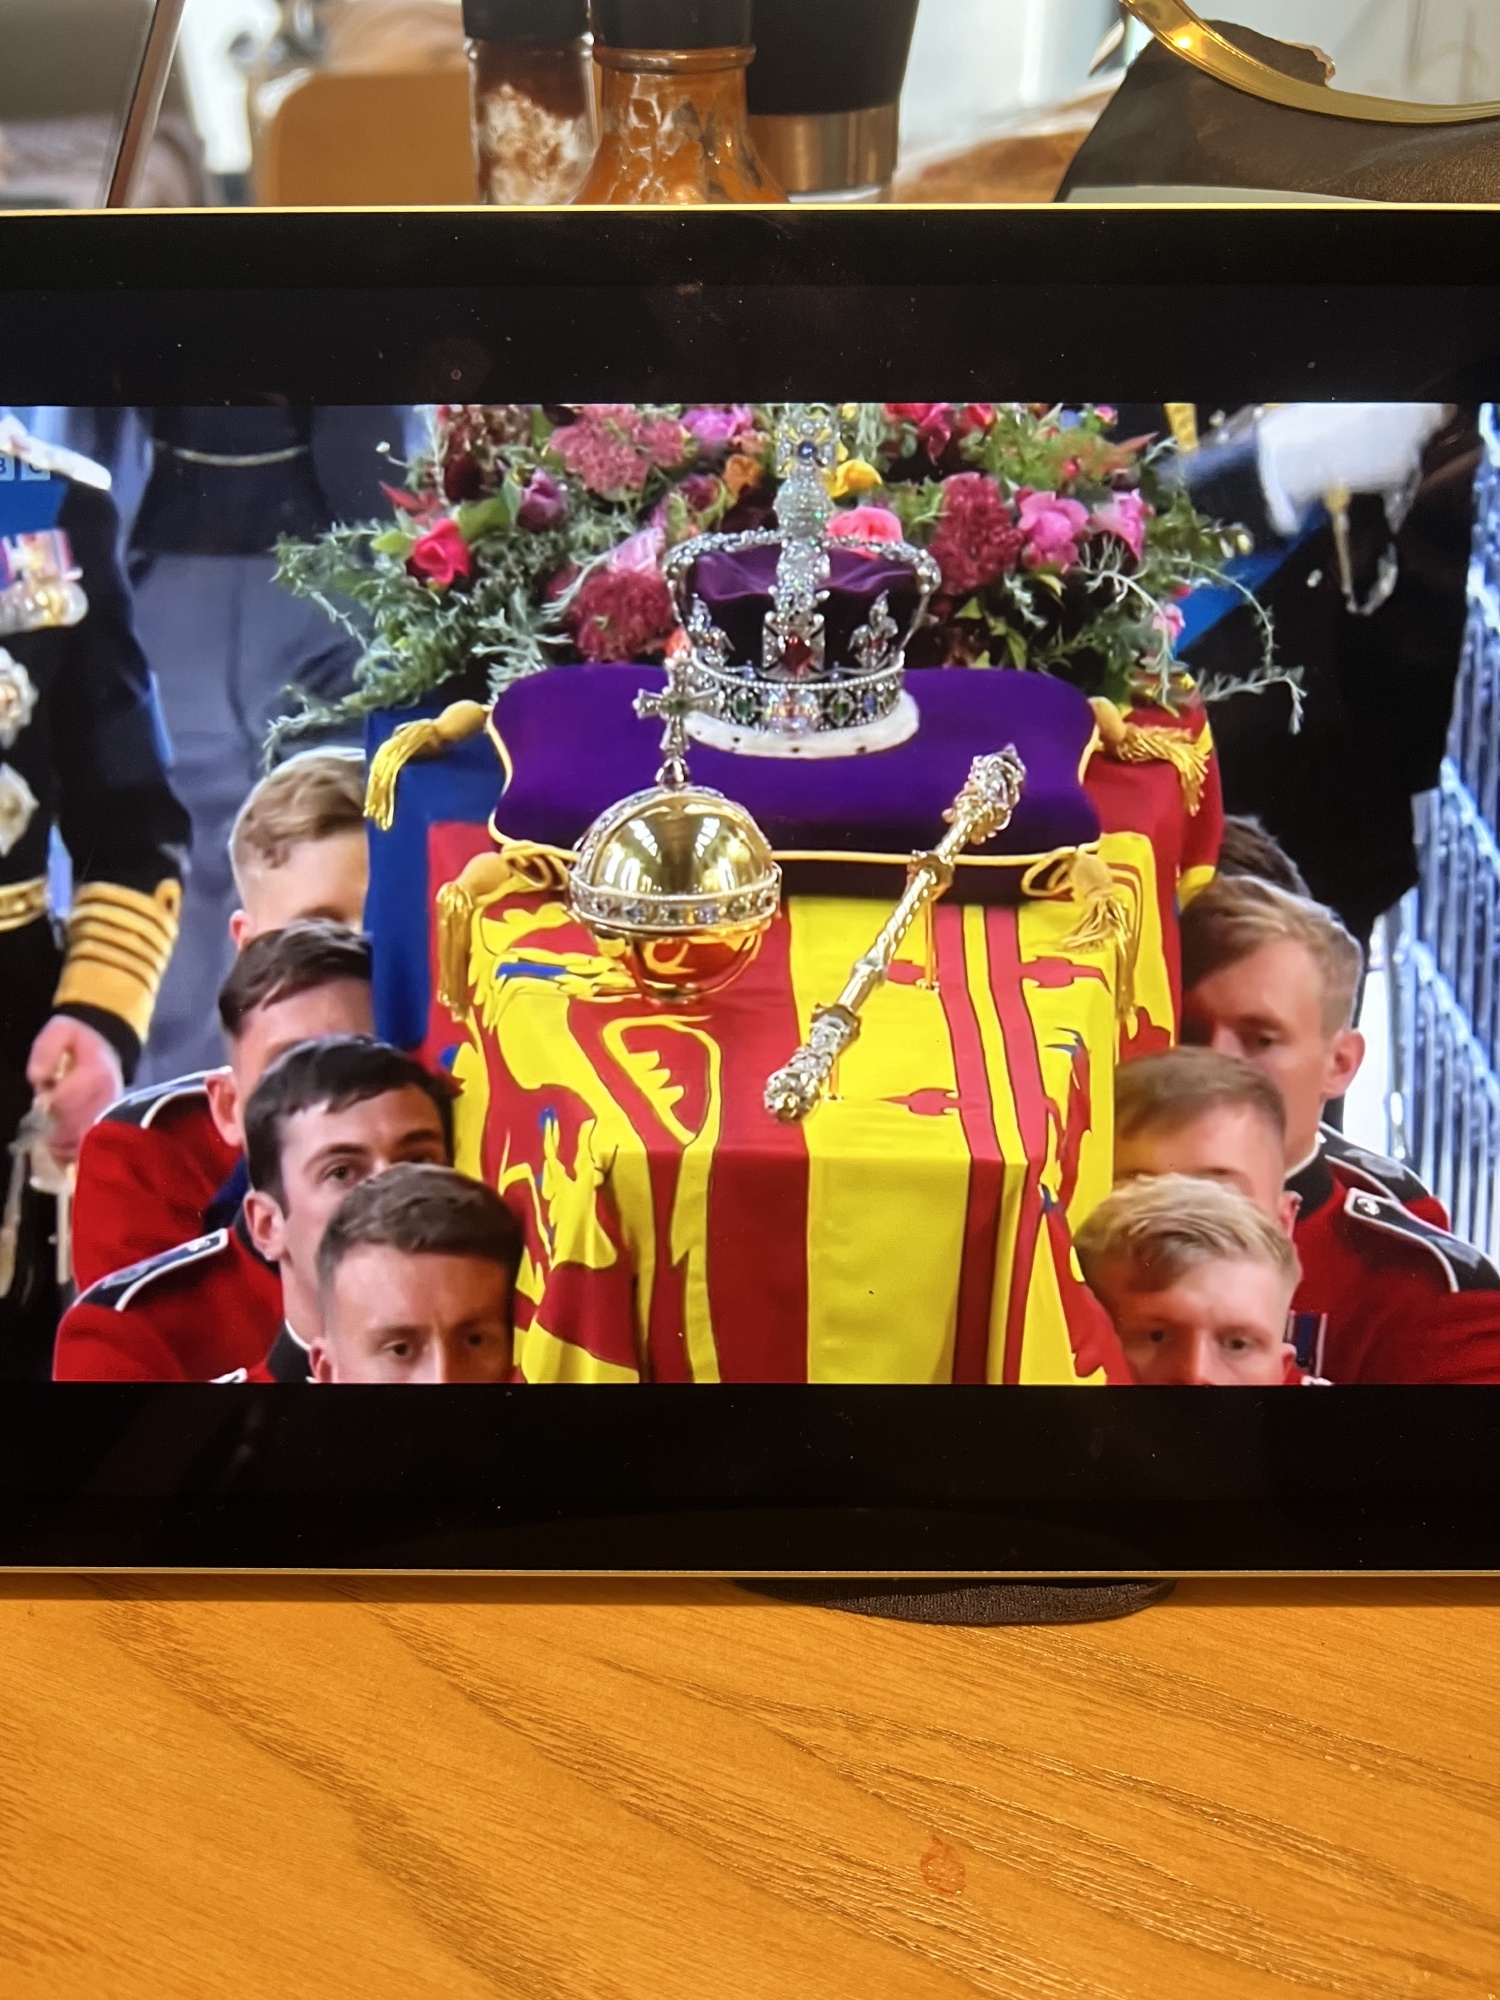 Watched the Queen's funeral